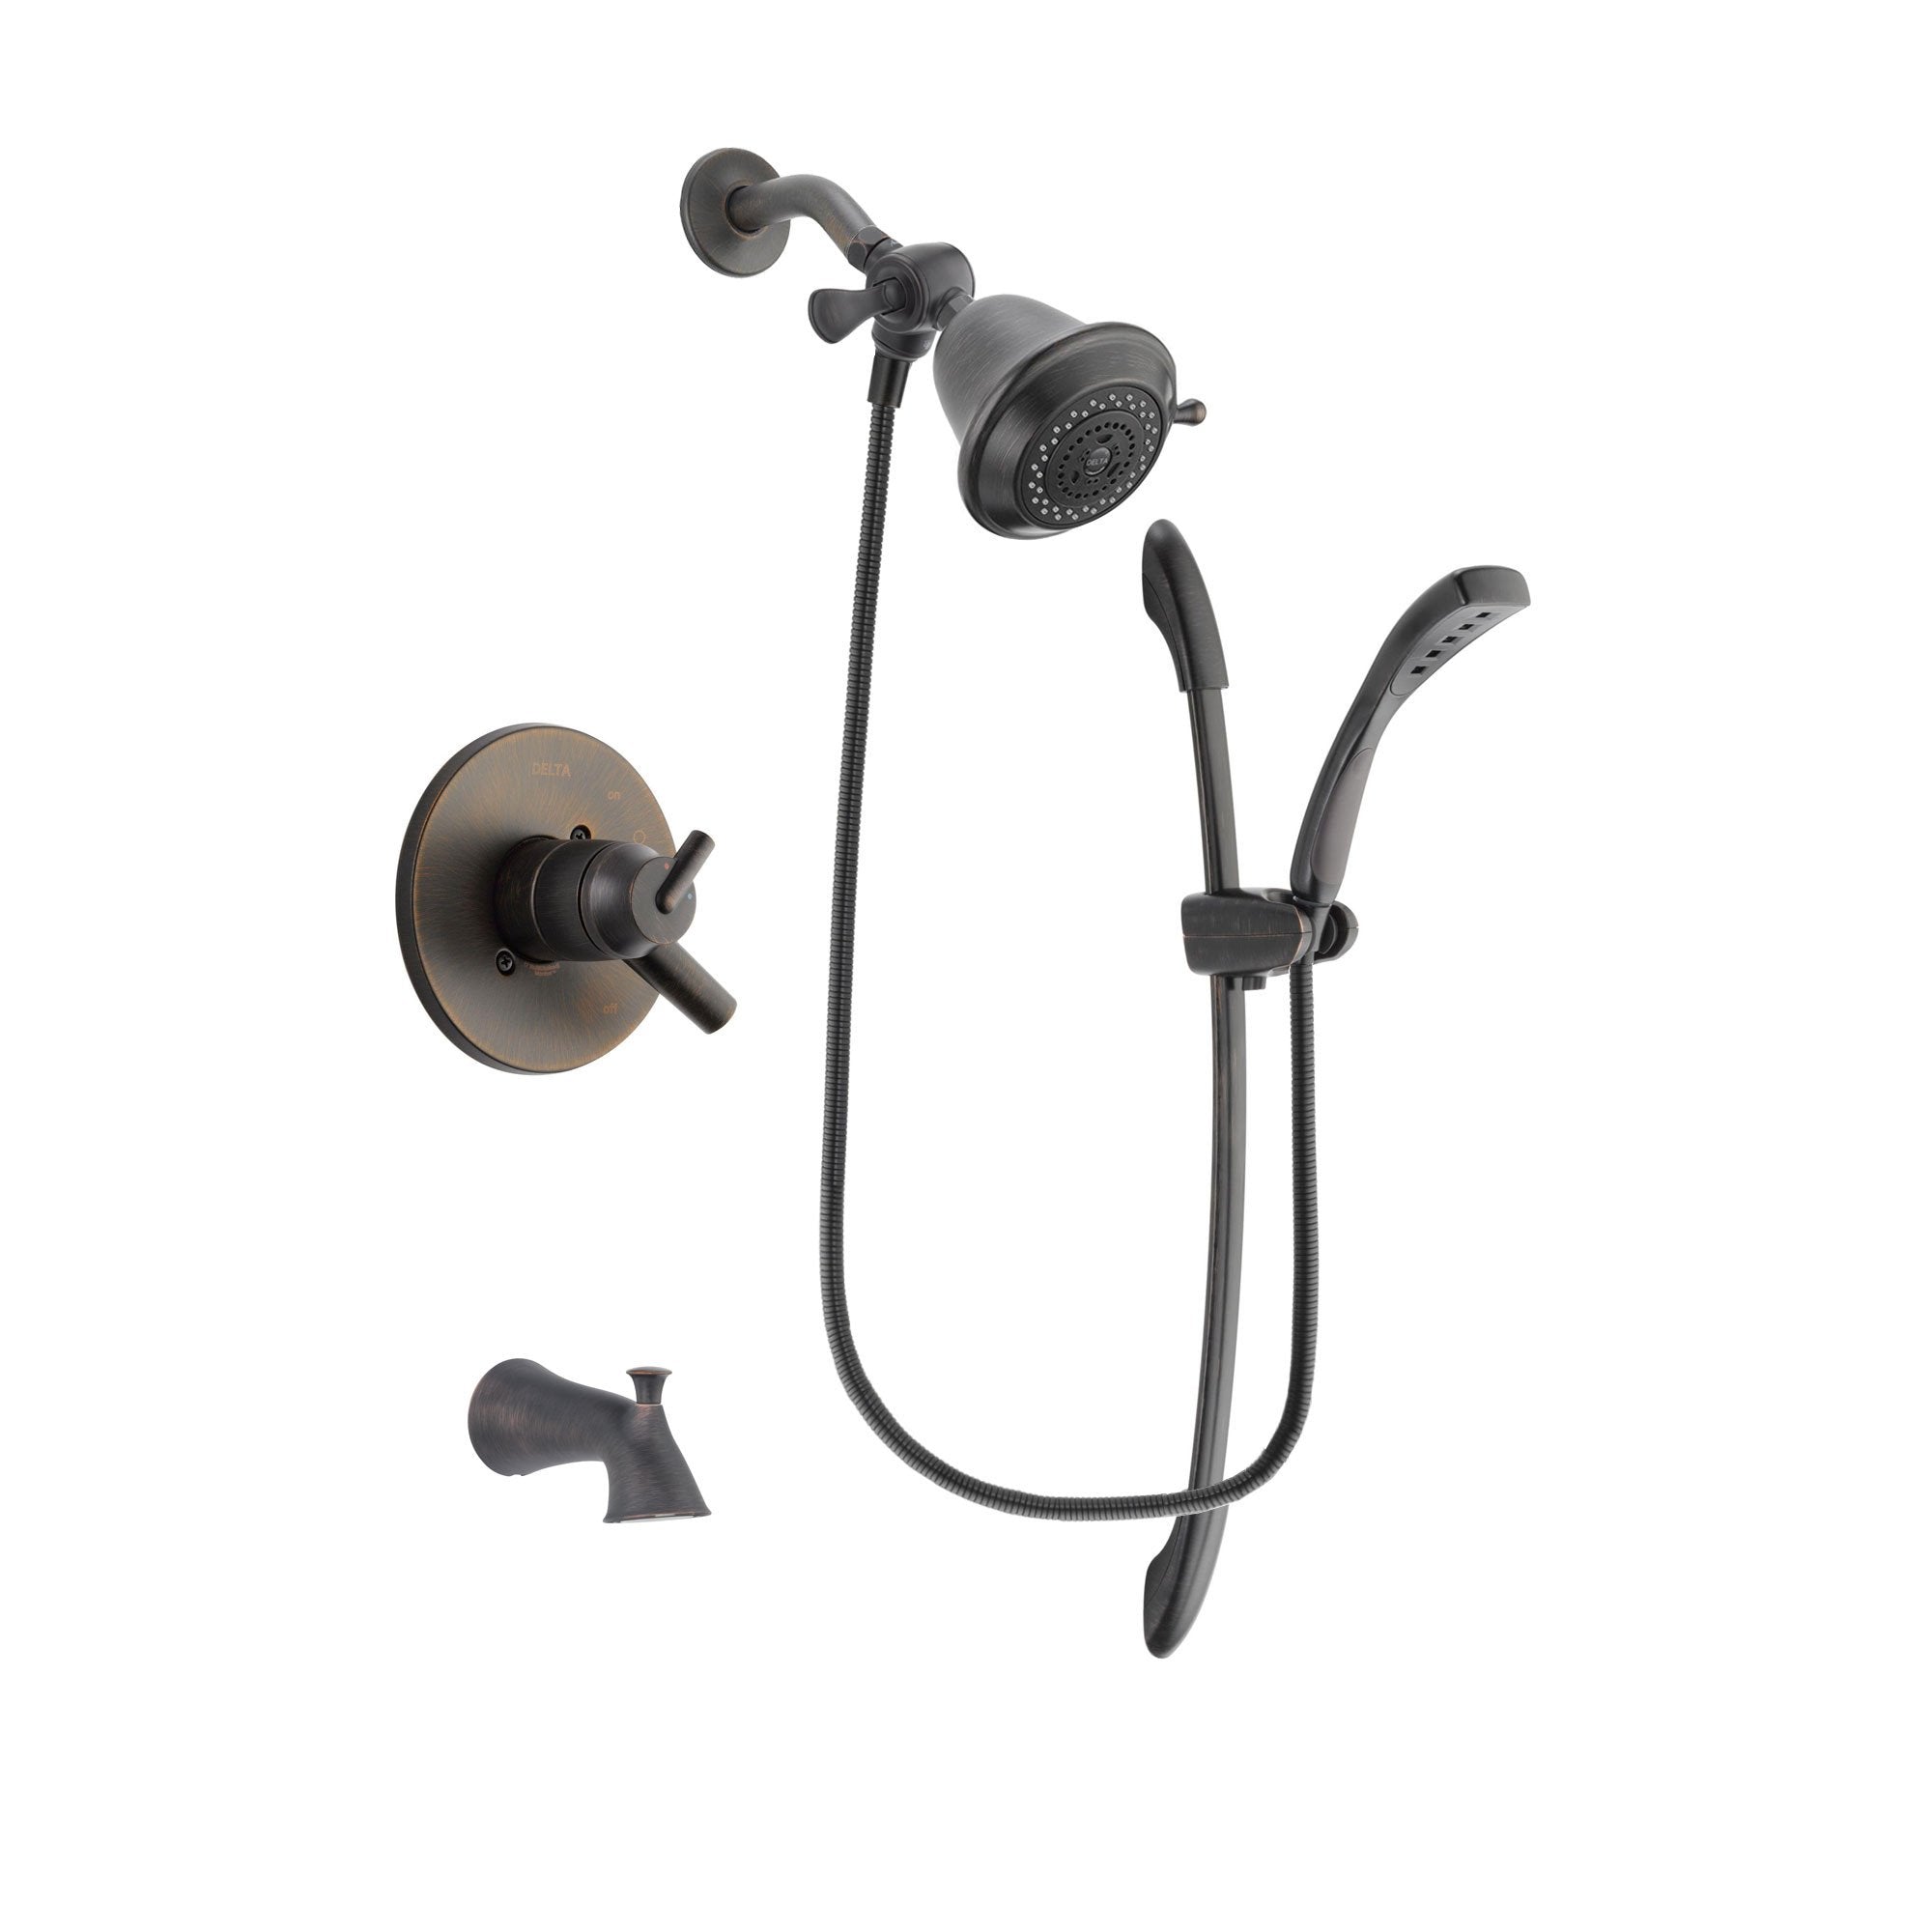 Delta Trinsic Venetian Bronze Finish Dual Control Tub and Shower Faucet System Package with Shower Head and 1-Spray Handshower with Slide Bar Includes Rough-in Valve and Tub Spout DSP2401V